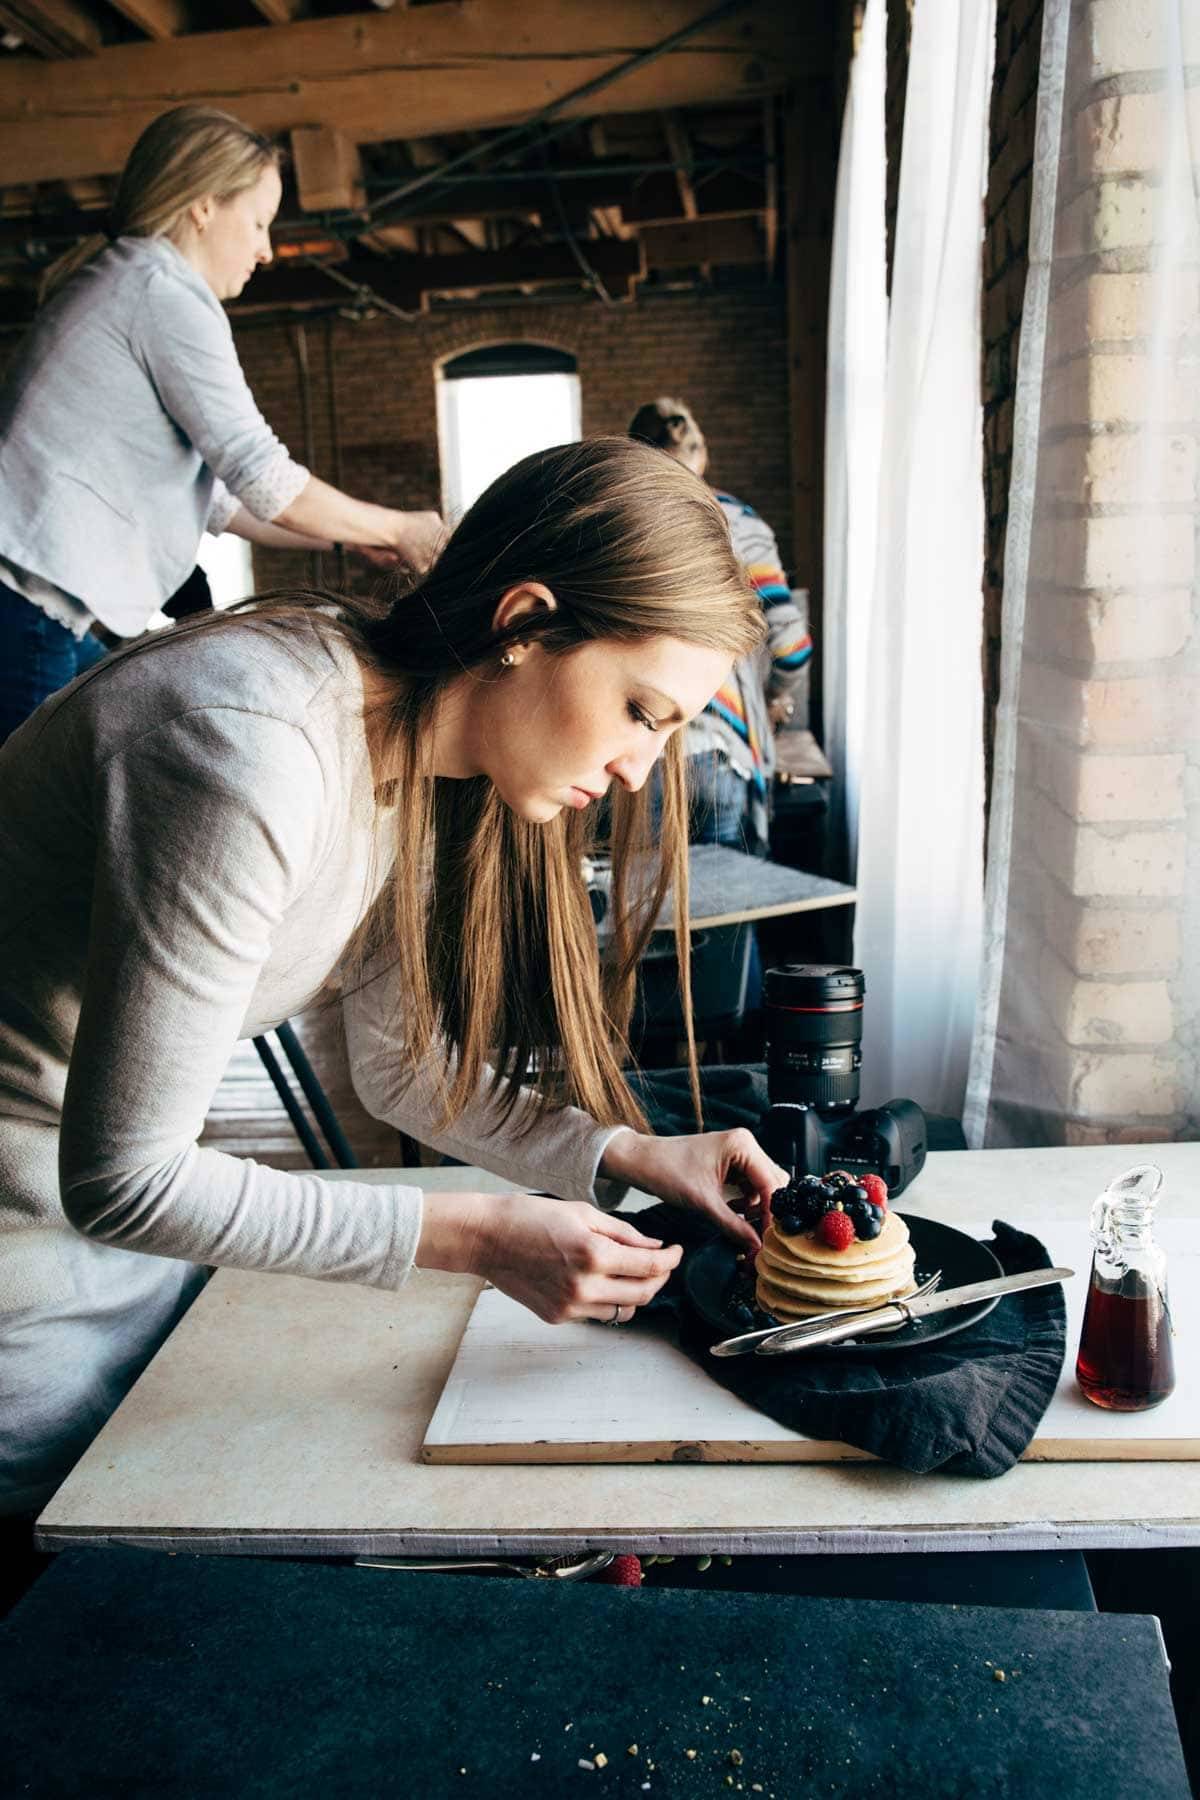 Woman styling pancakes on a plate with a dark napkin.